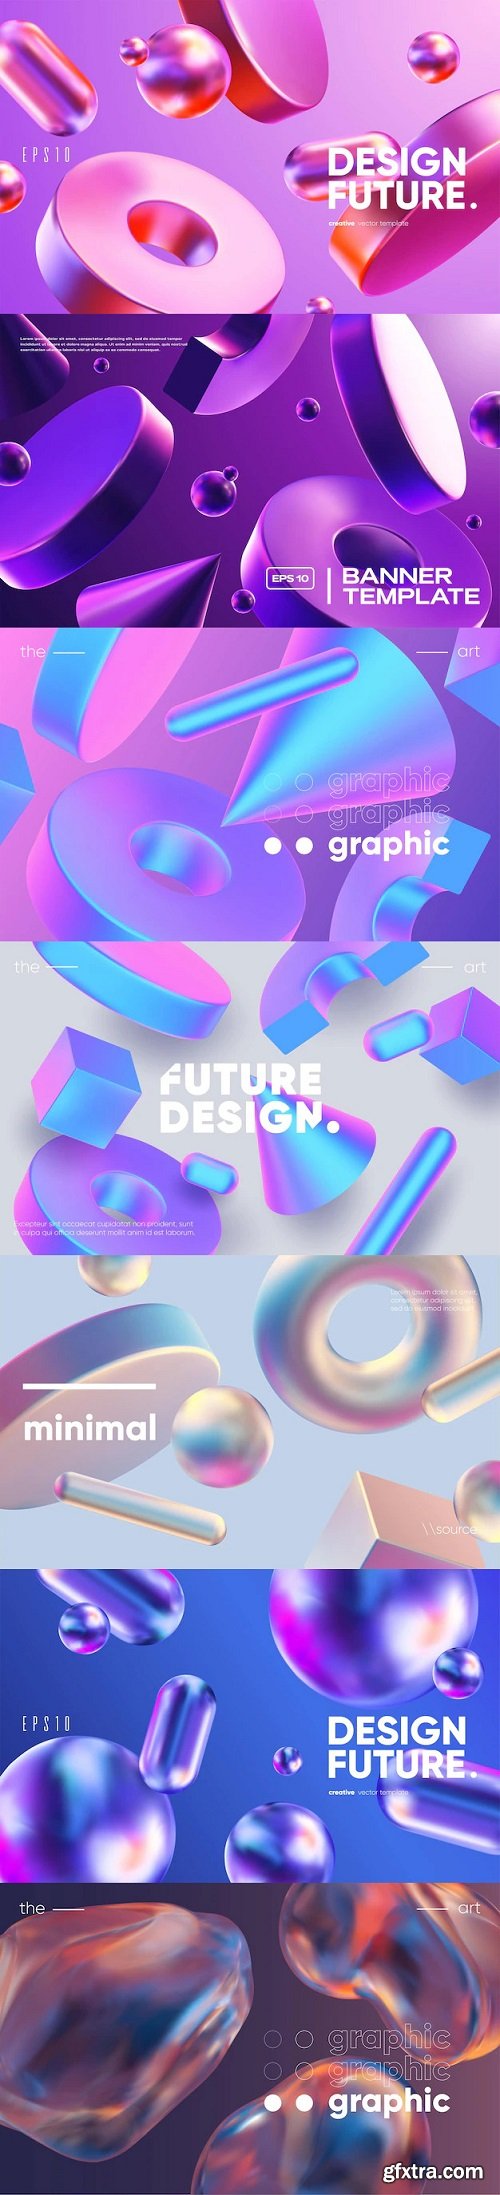 3d background with colorful geometric shapes eps10 vector